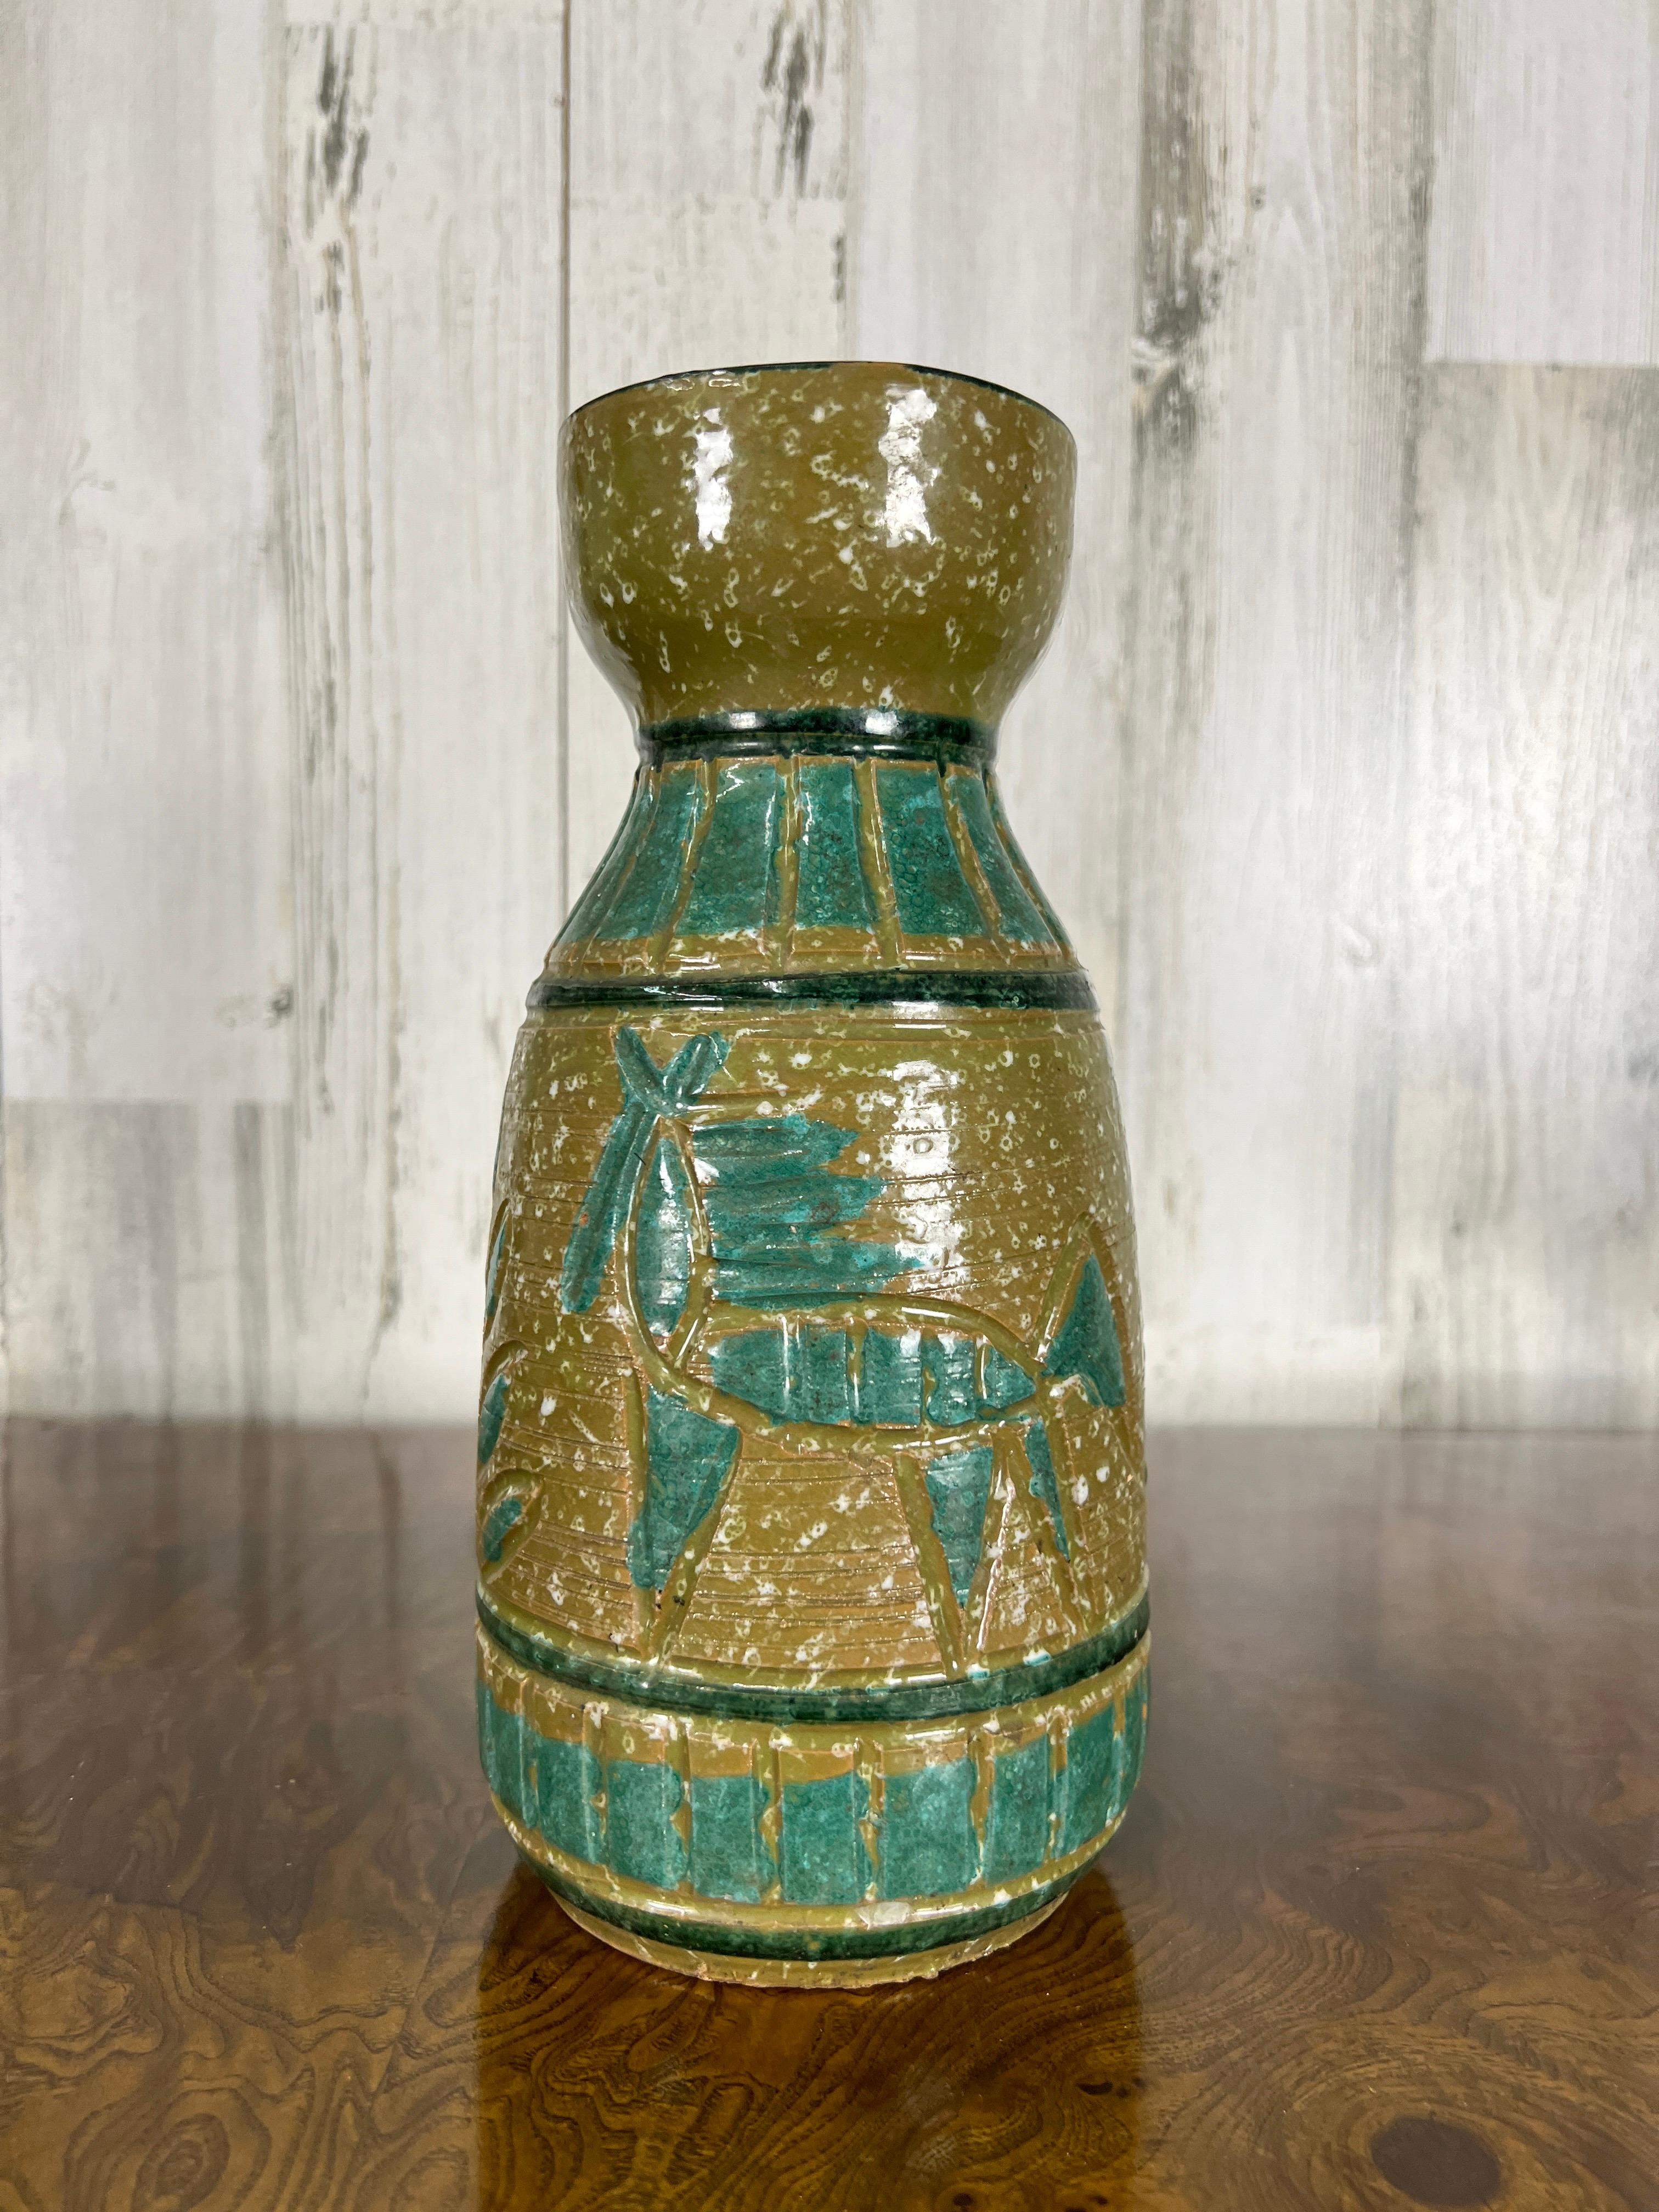 Avocado and spruce colored glaze surround this vase with horse and tree design. 
Made in Italy.